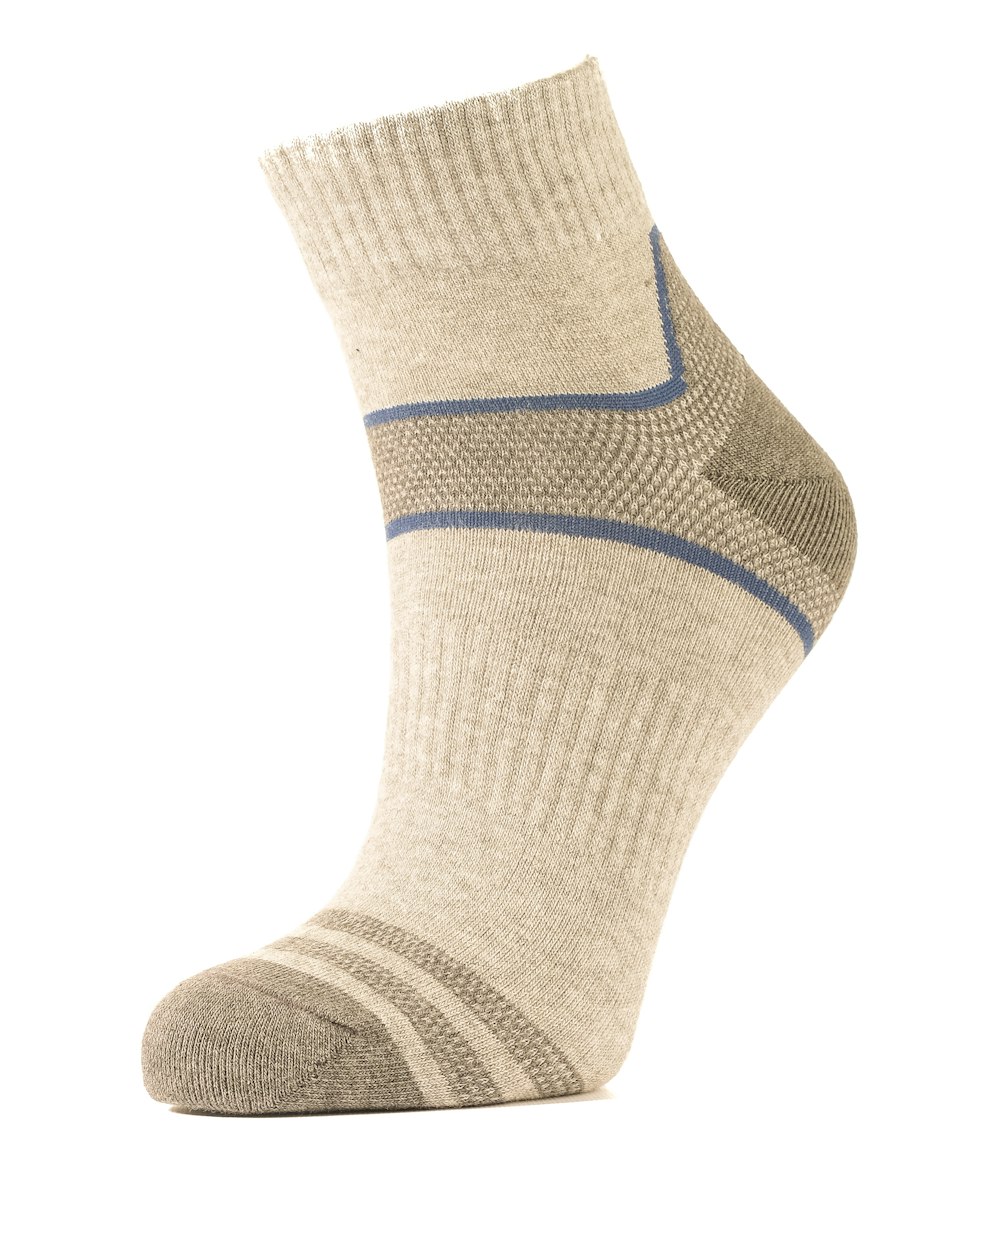 person wearing black and gray sock